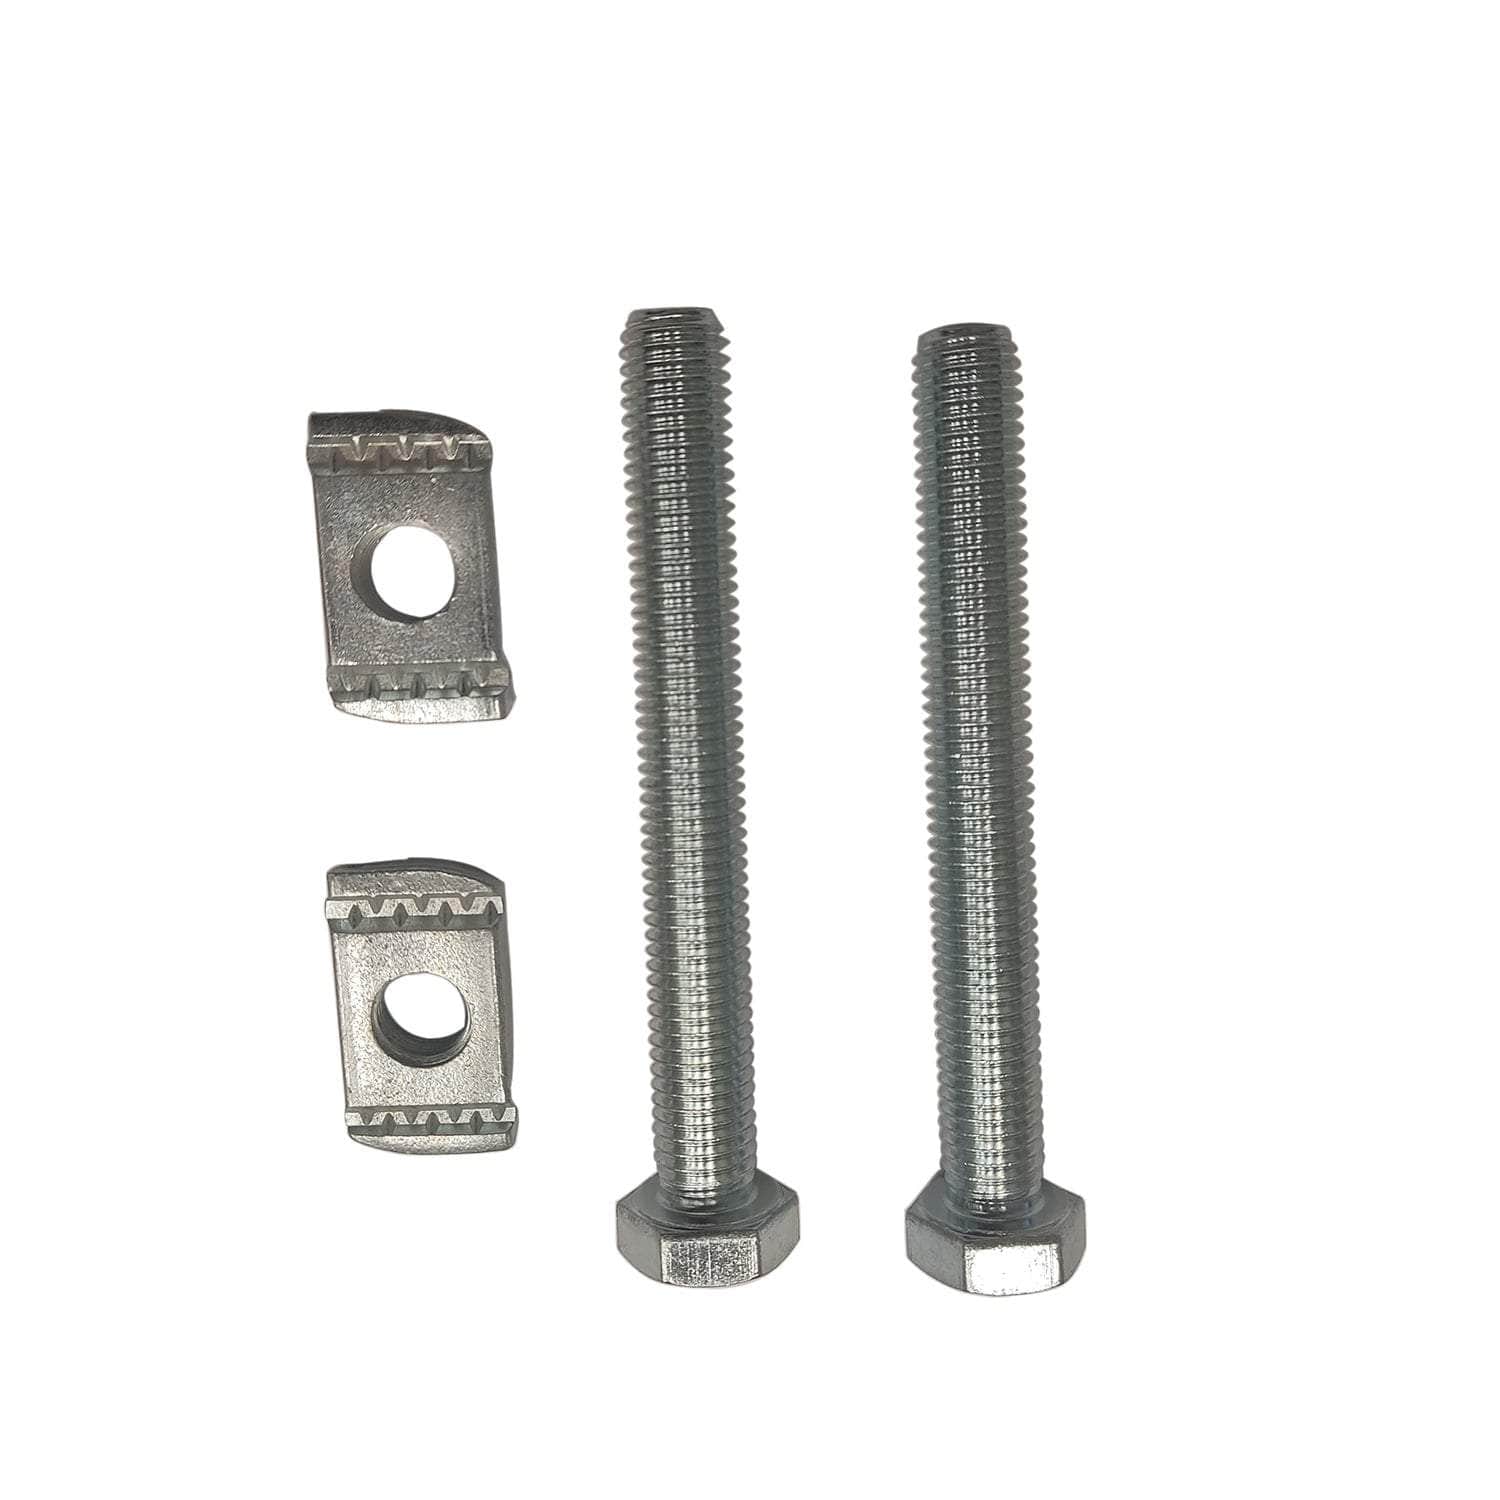 Barrel Adjusting Bolts & Wedge Nuts (pair) for use with Aga range cookers